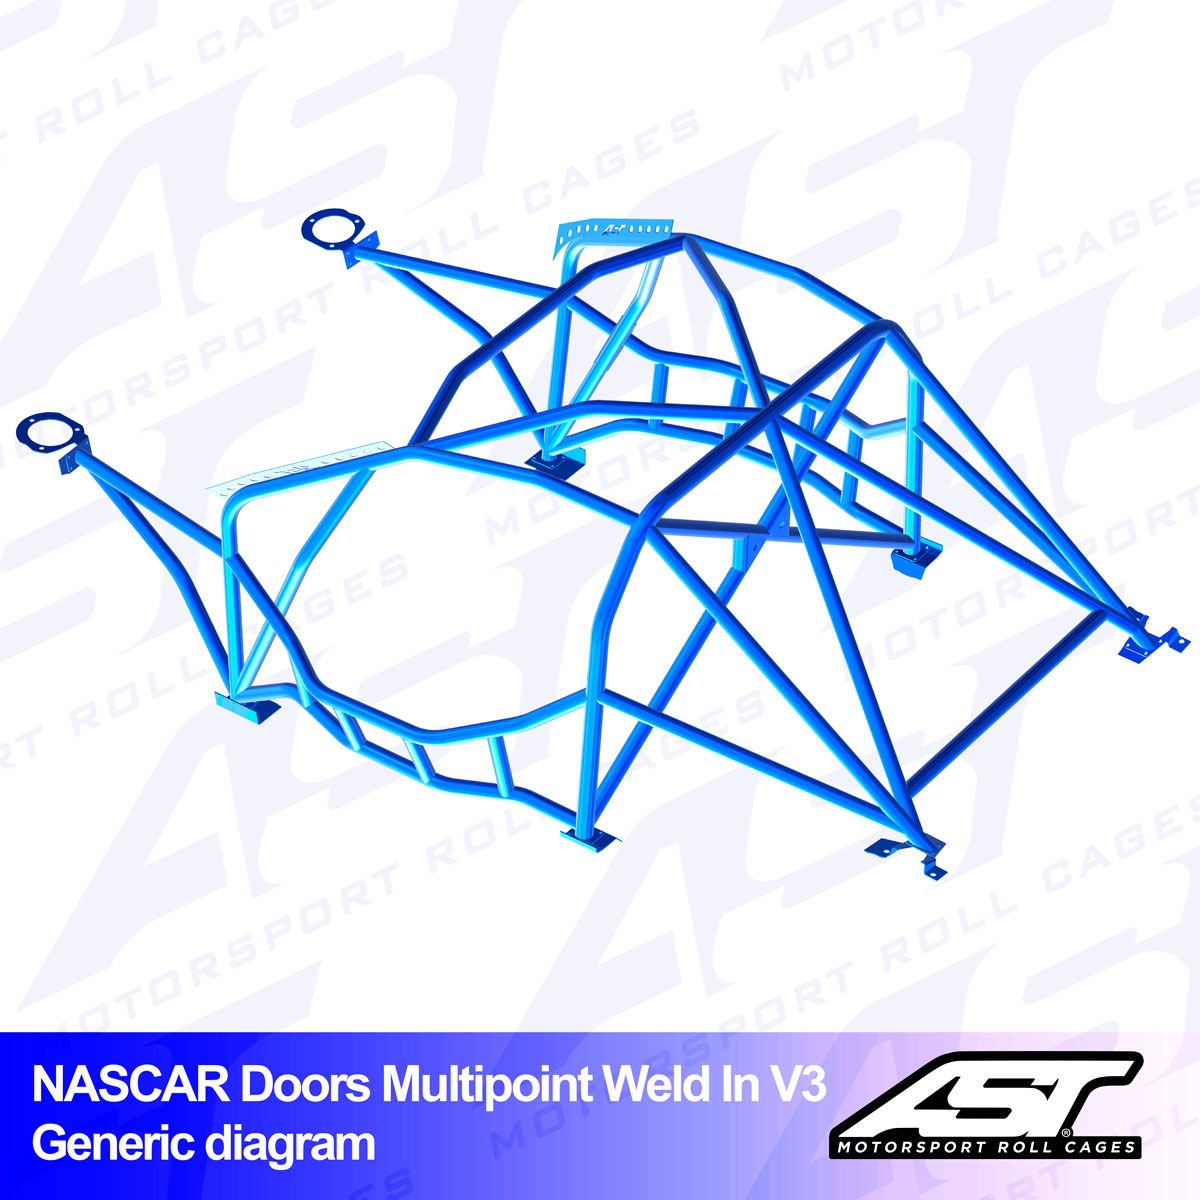 Roll Cage BMW (E91) 3-Series 5-doors Touring RWD MULTIPOINT WELD IN V3 NASCAR-door for drift